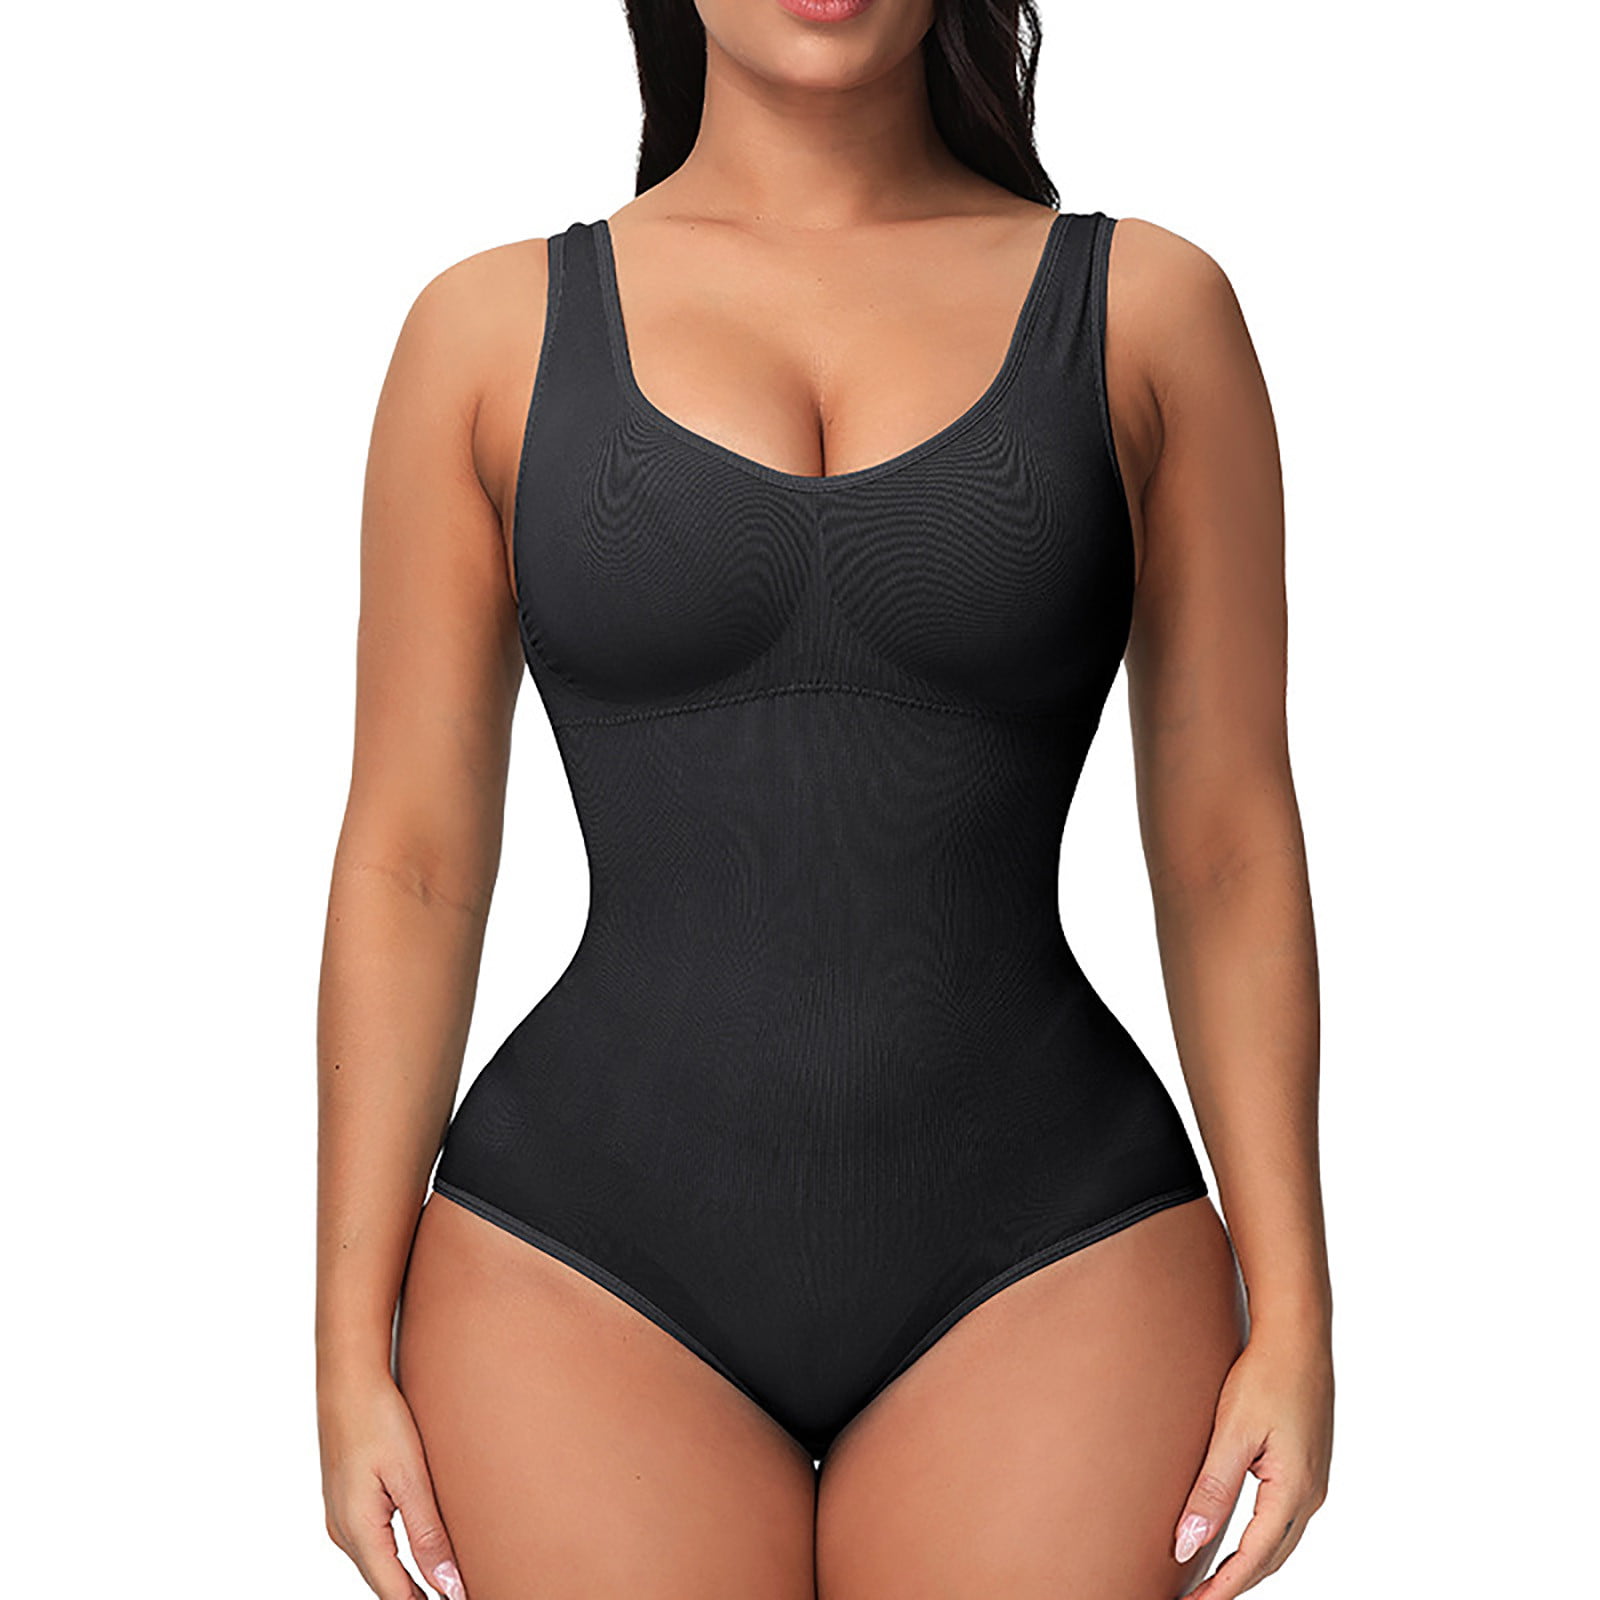  Women Slimming Bodysuits Shapewear Tops Tummy Control Body  Shaper, Seamless Camisole Body Suit Jumpsuit (Color : Black, Size : Large)  : Clothing, Shoes & Jewelry